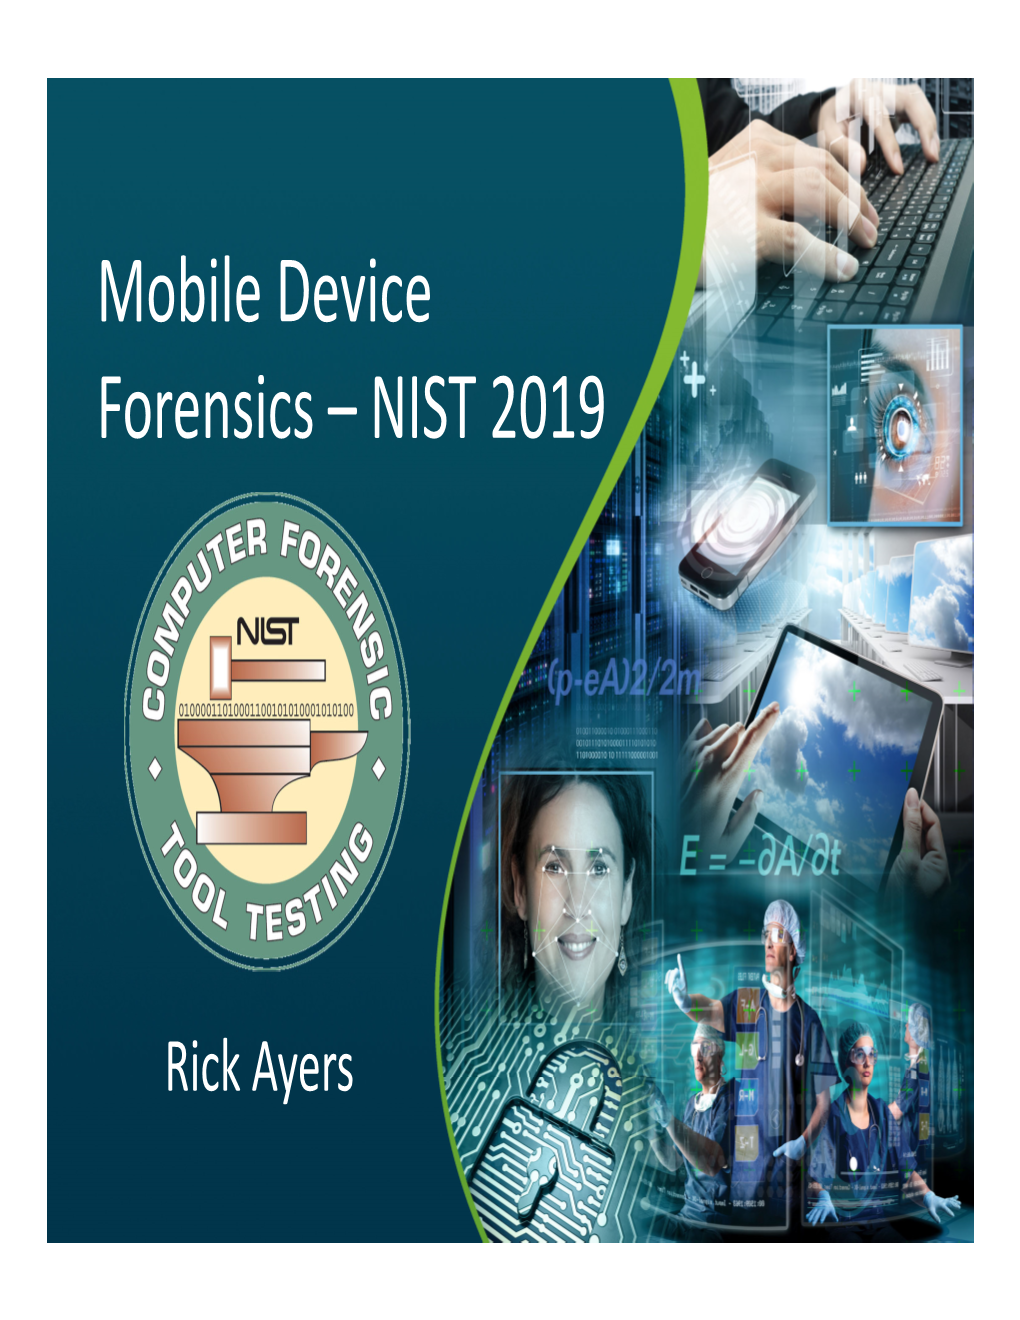 Mobile Device Forensics – NIST 2019